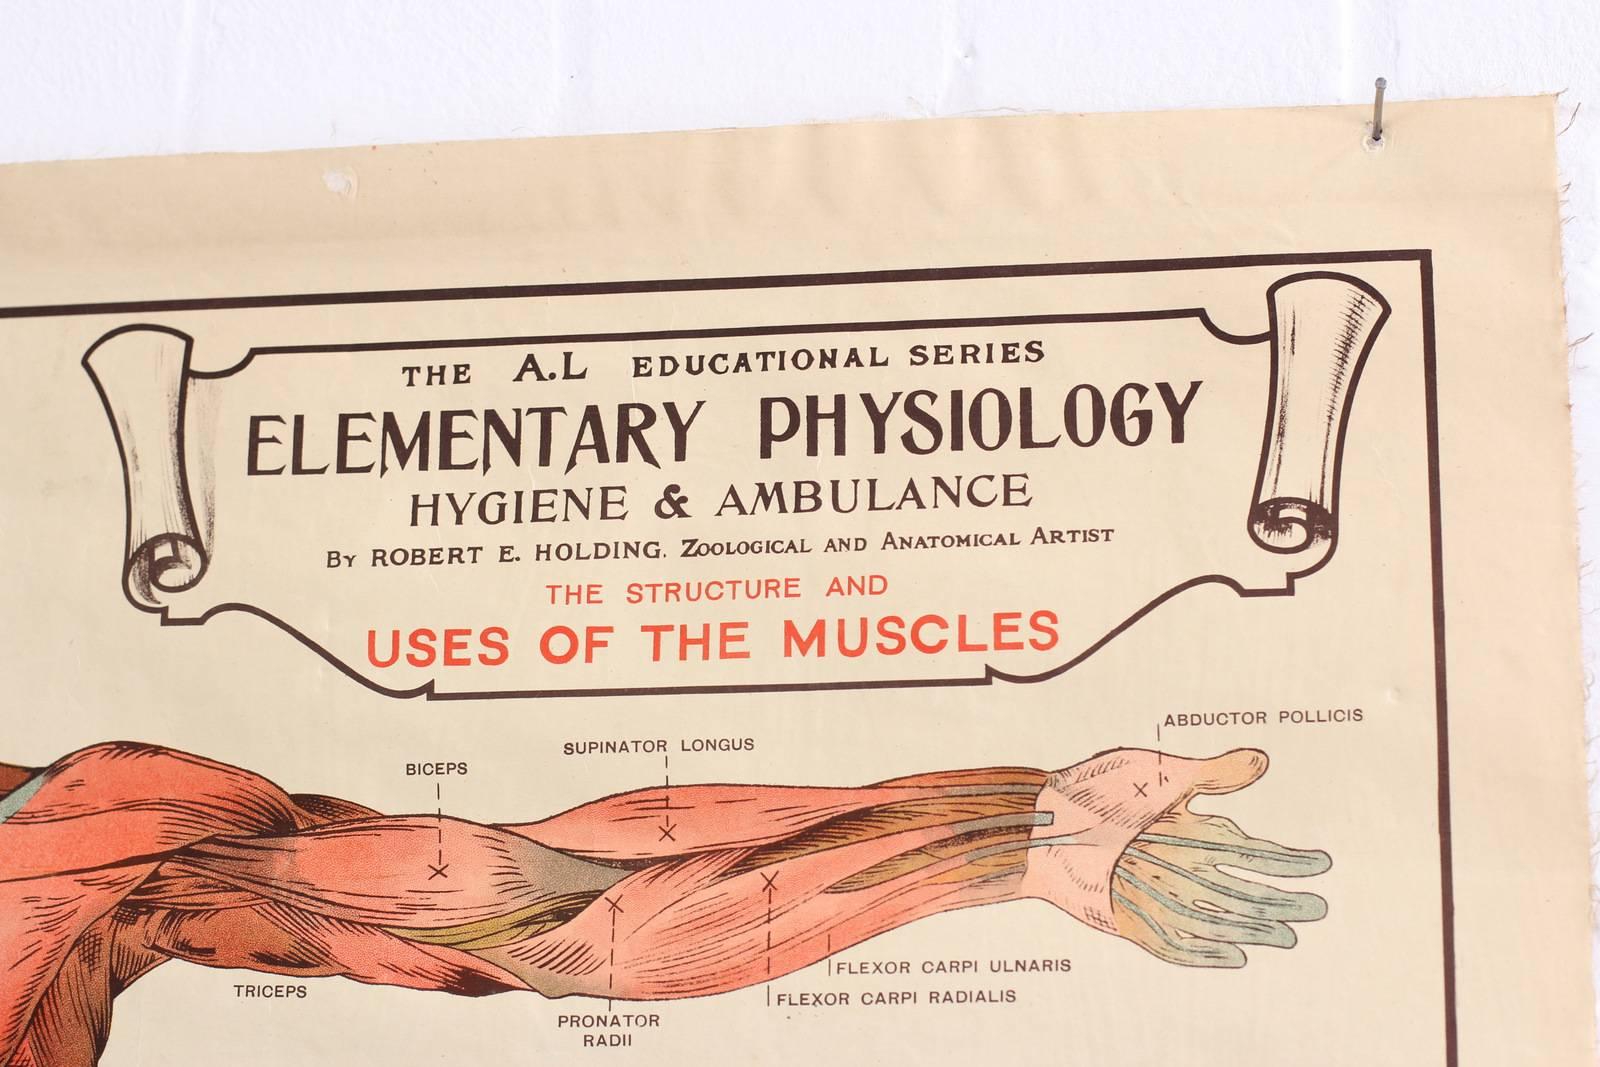 Edwardian Anatomical Chart of the Muscles by Robert E Holding, circa 1910